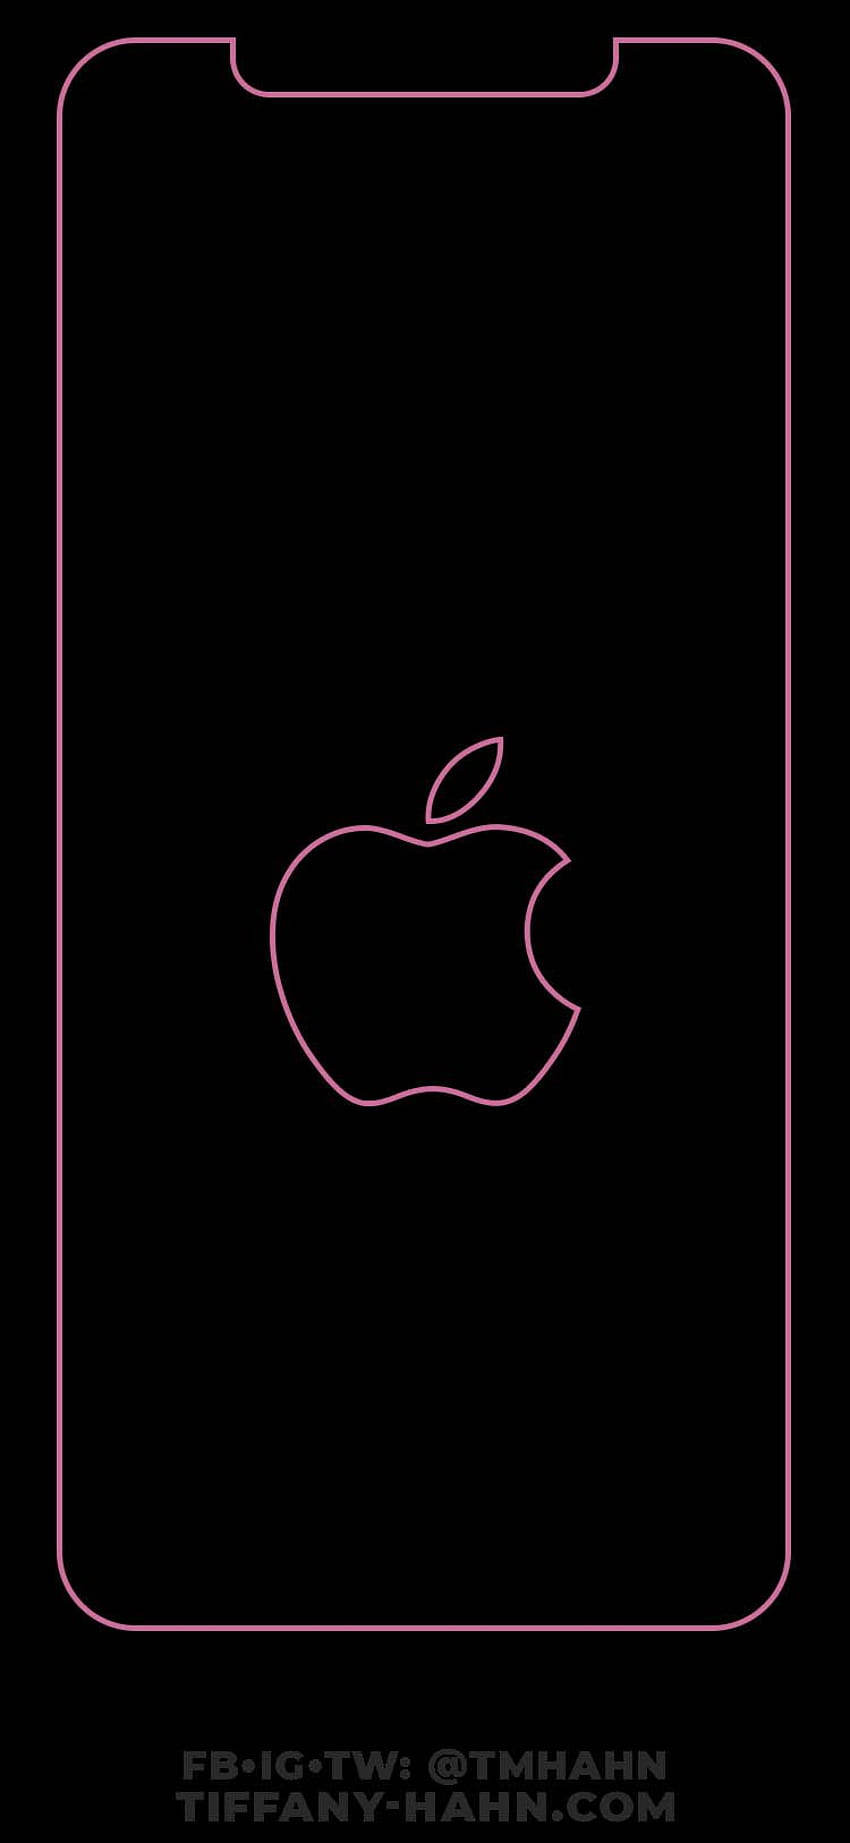 iPhone XS Max - Pink Black Outline - Lock Screen. iPhone homescreen , Homescreen iphone, Lock screen iphone, Pink and Black Apple HD phone wallpaper